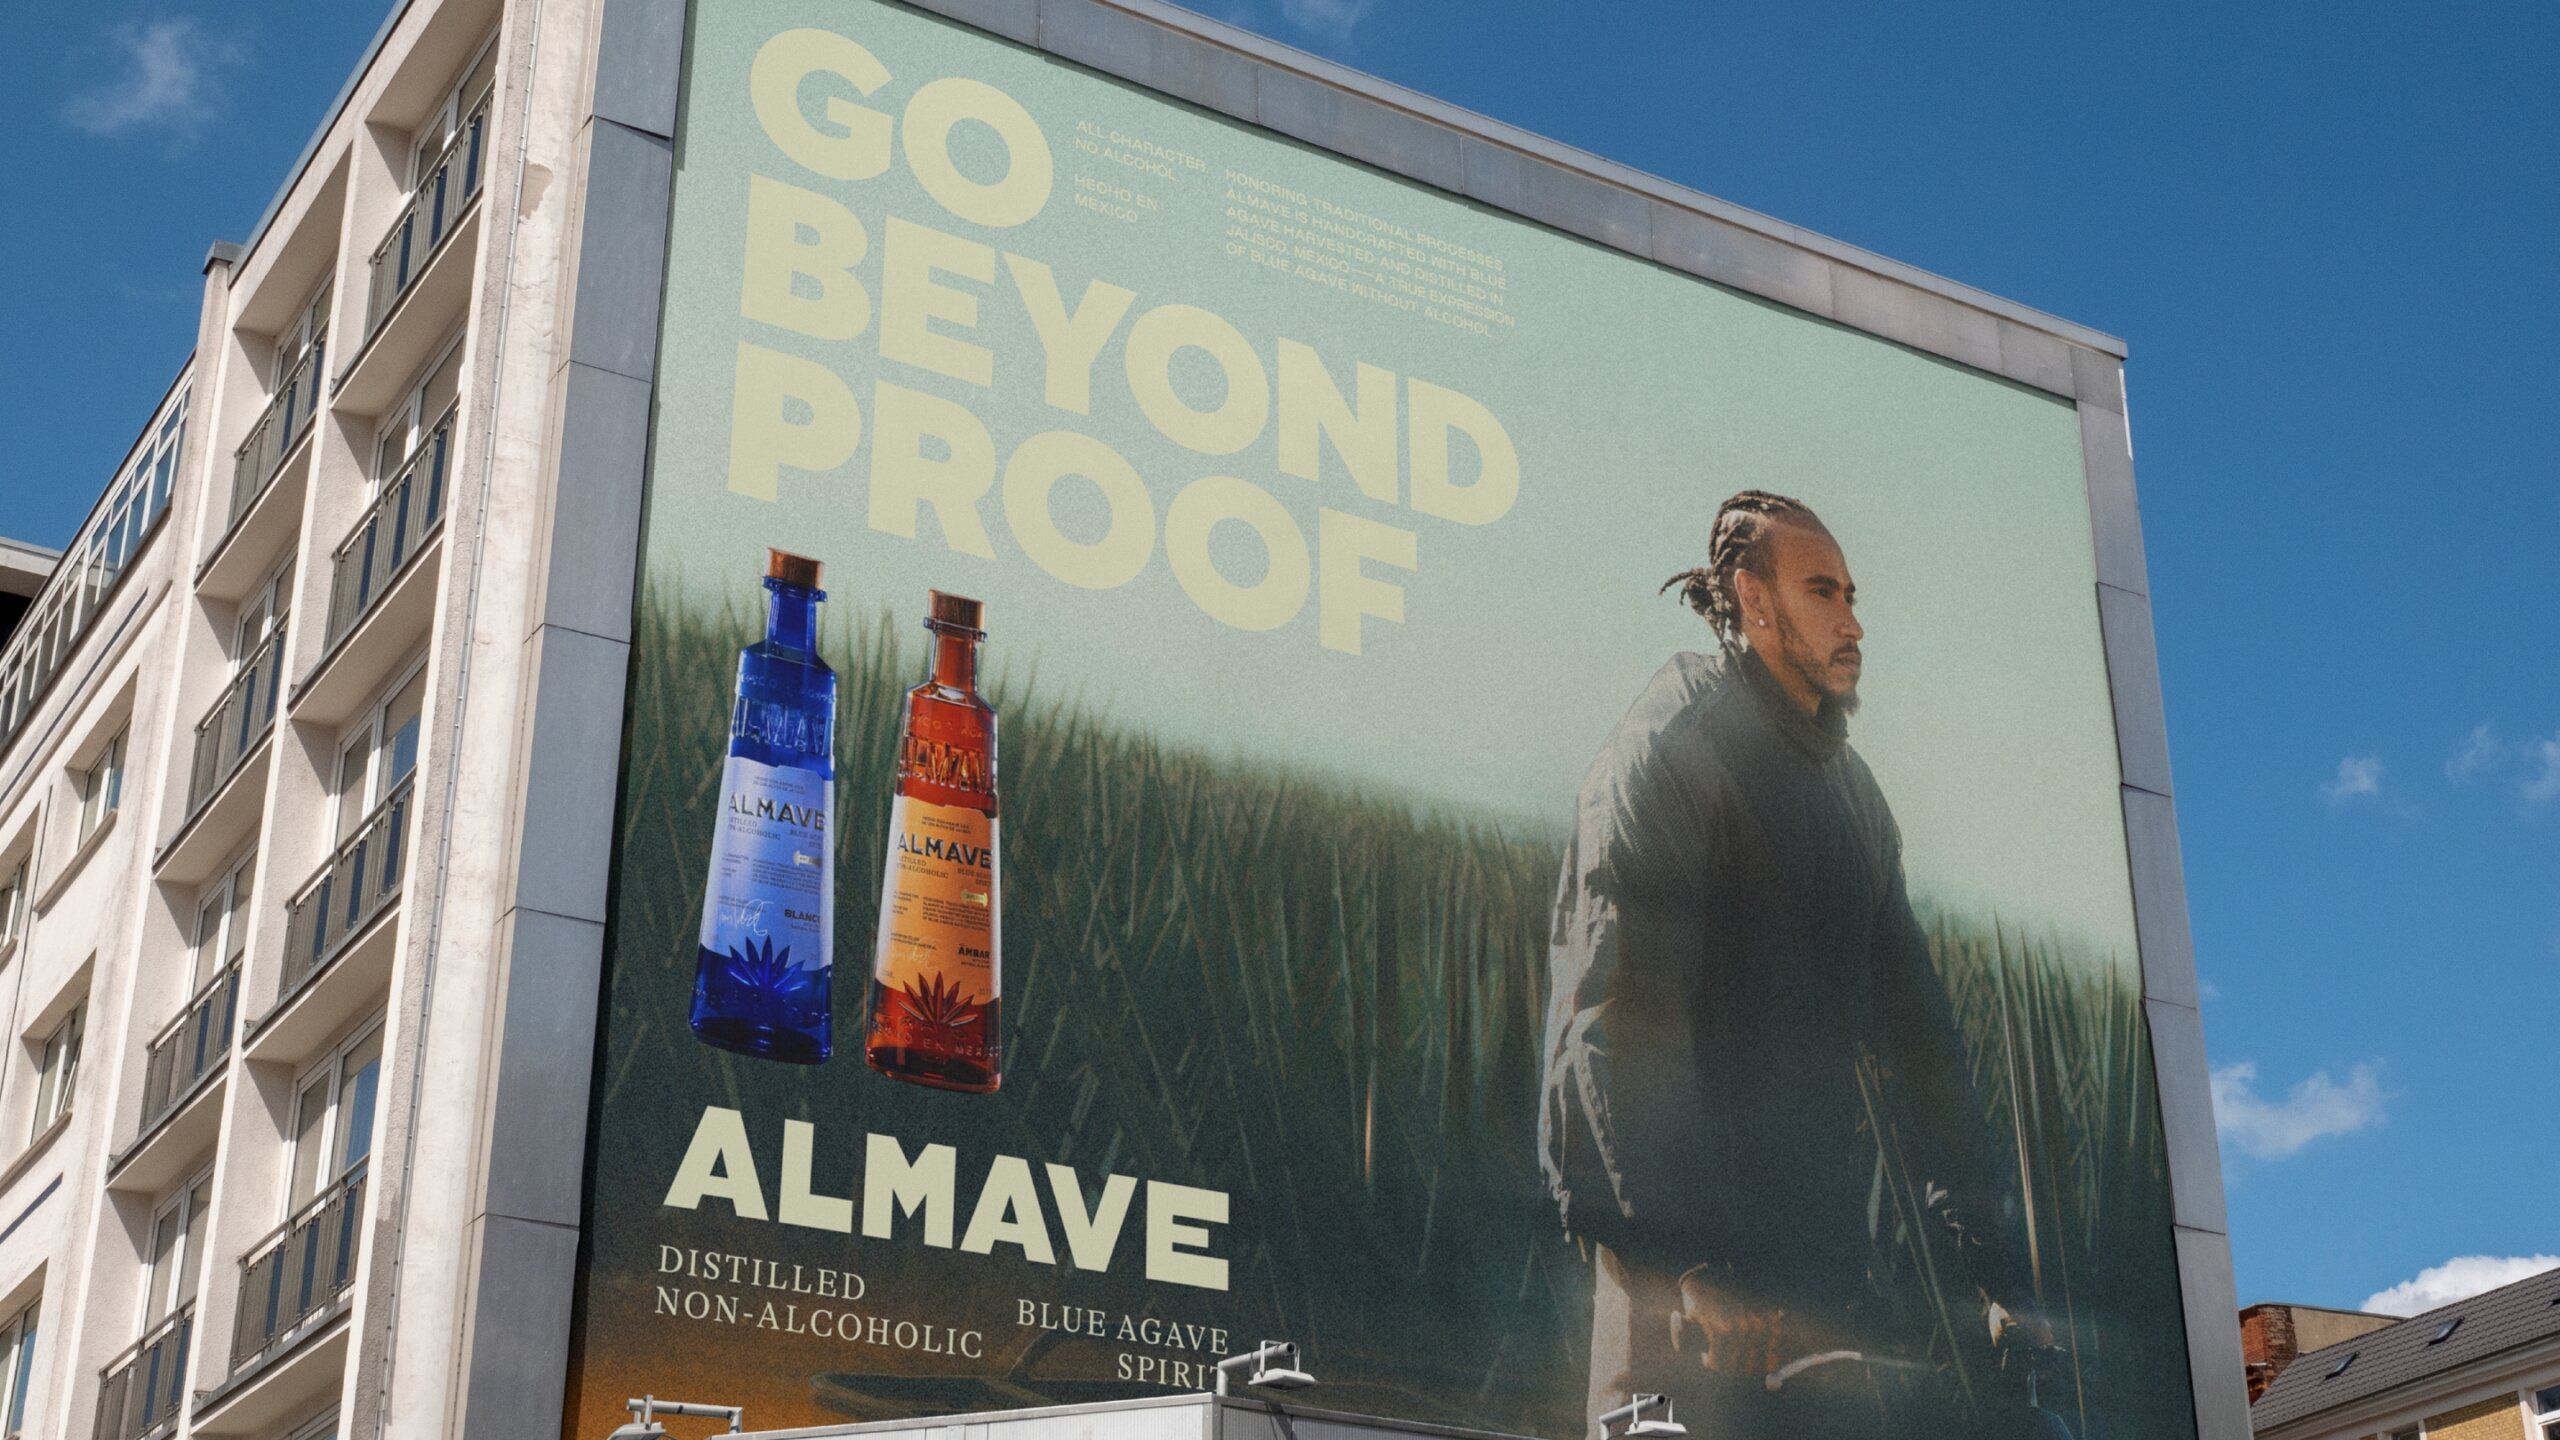 Building with large billboard showing Lewis Hamilton in agave field. Go beyond proof. Almave. 2 bottles of Almave Spirits